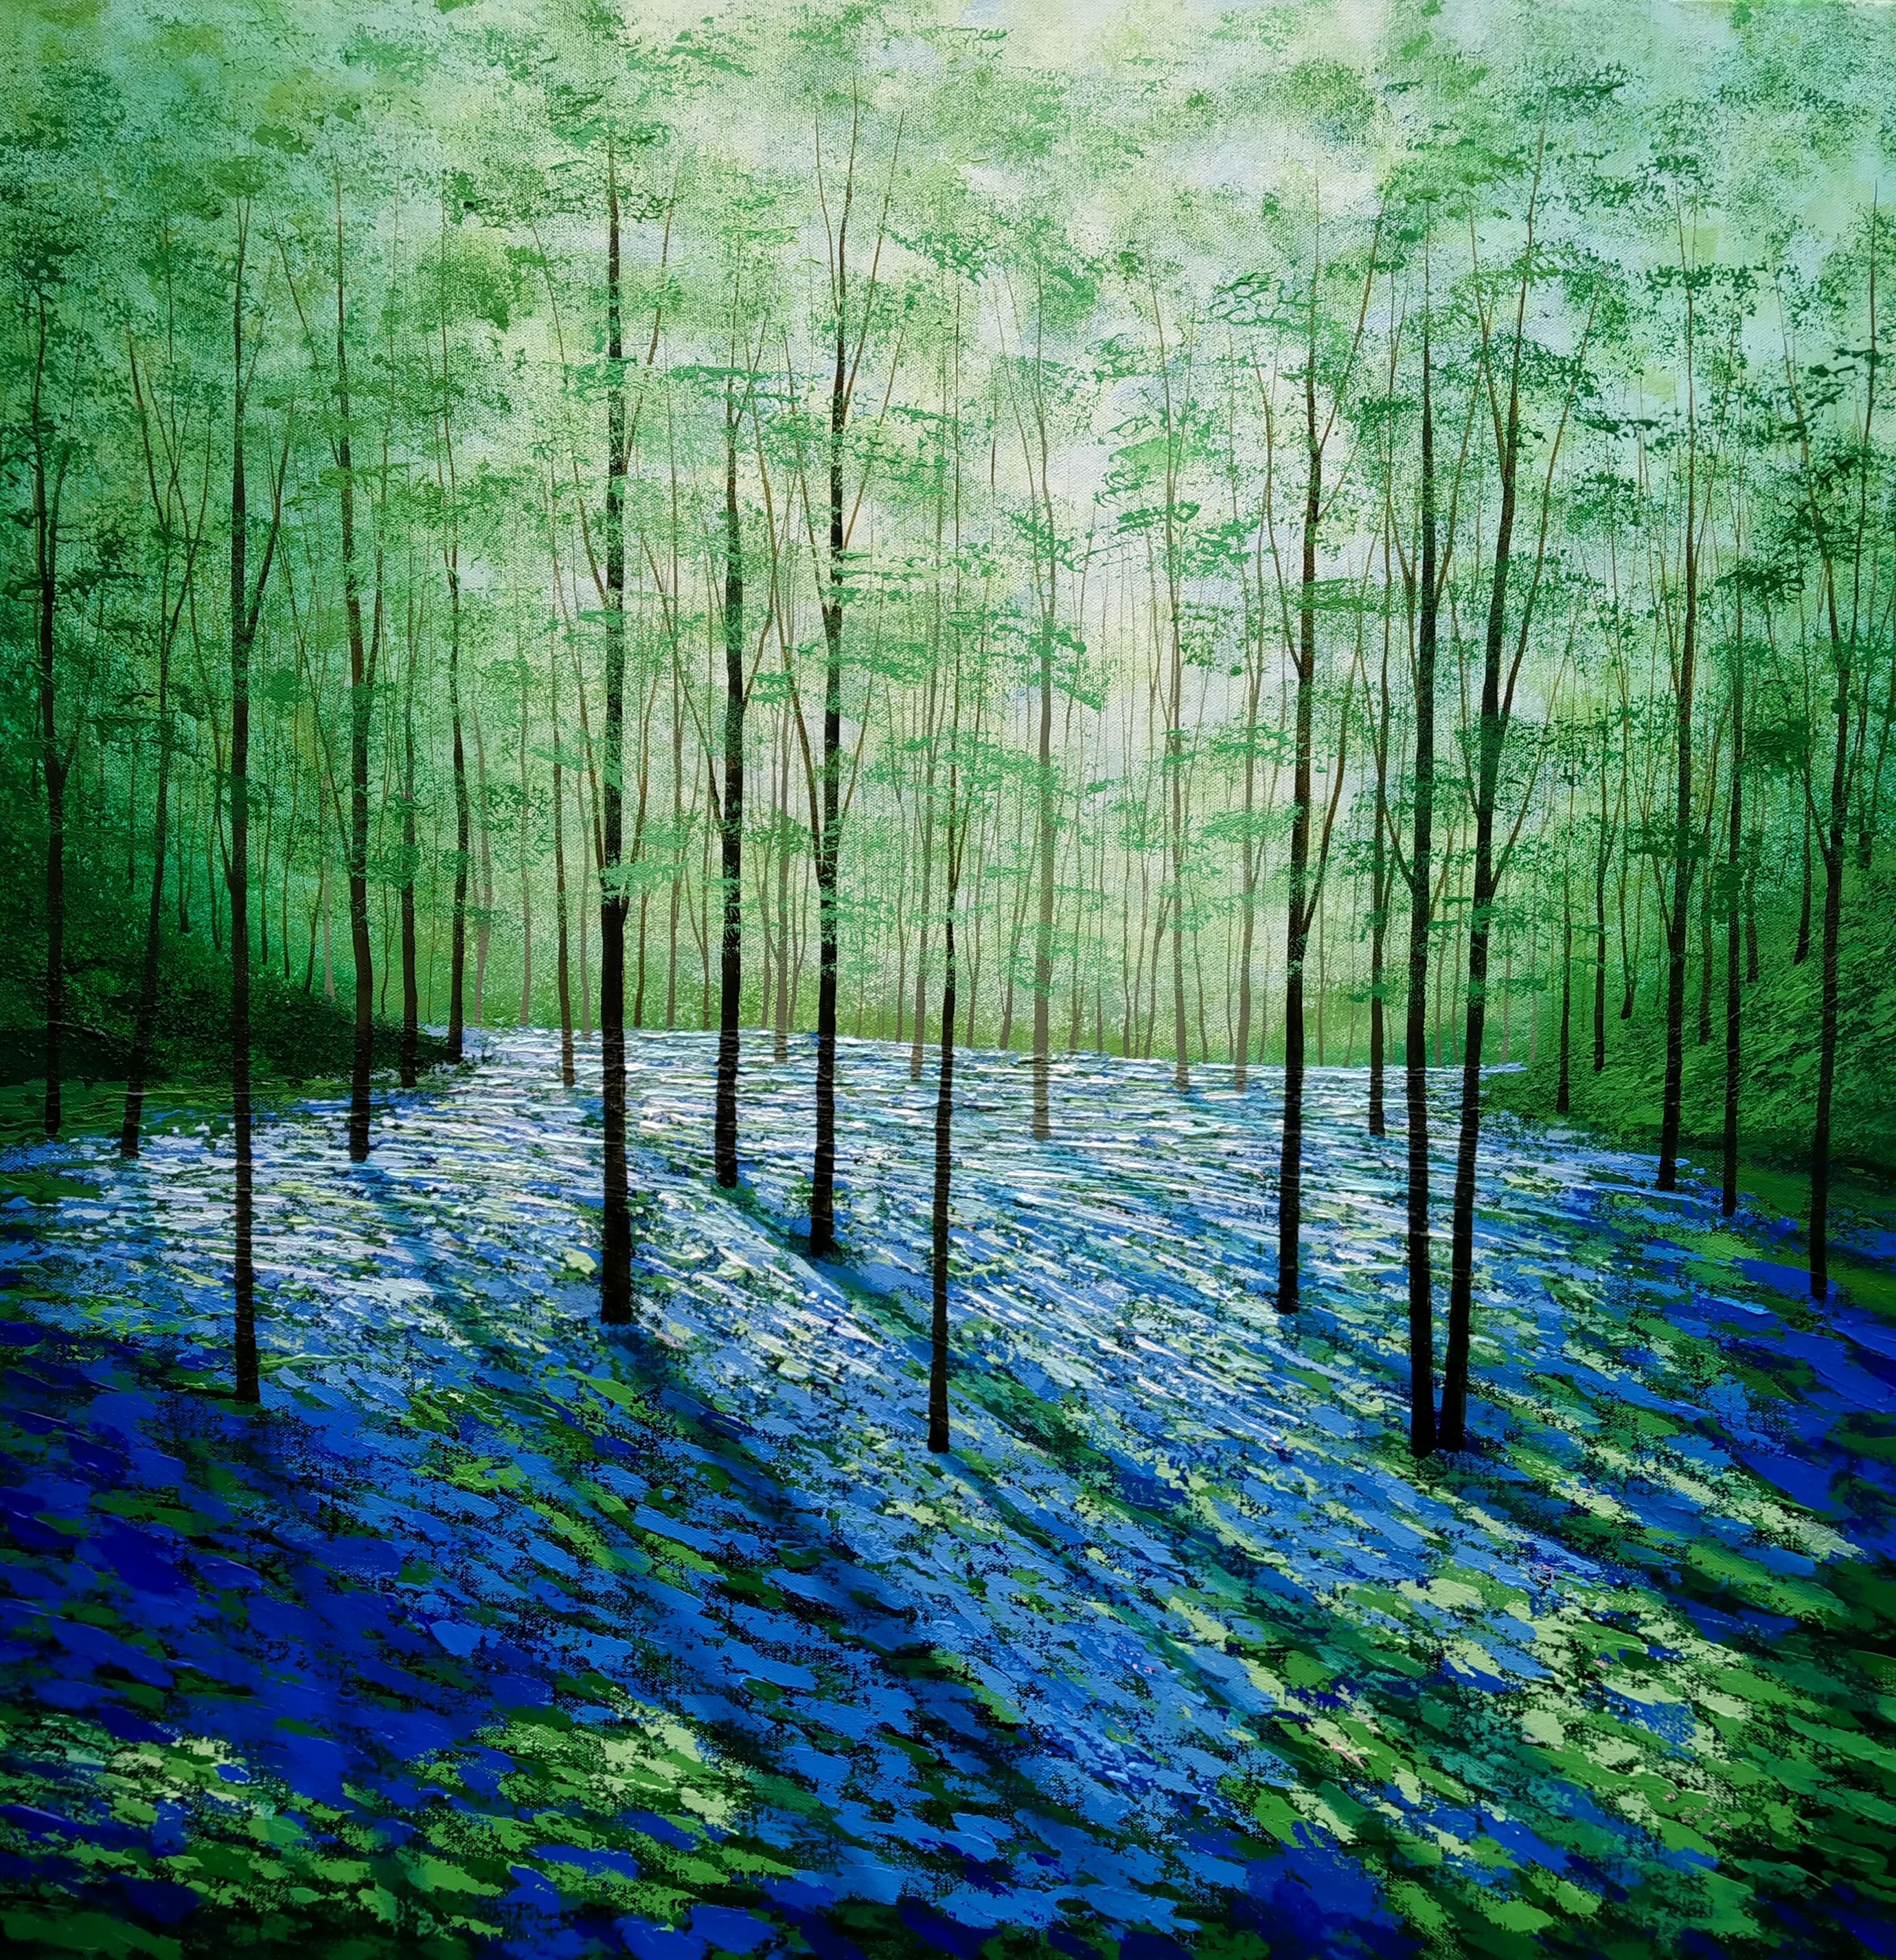 By the Bluebell Wood by Amanda Horvath